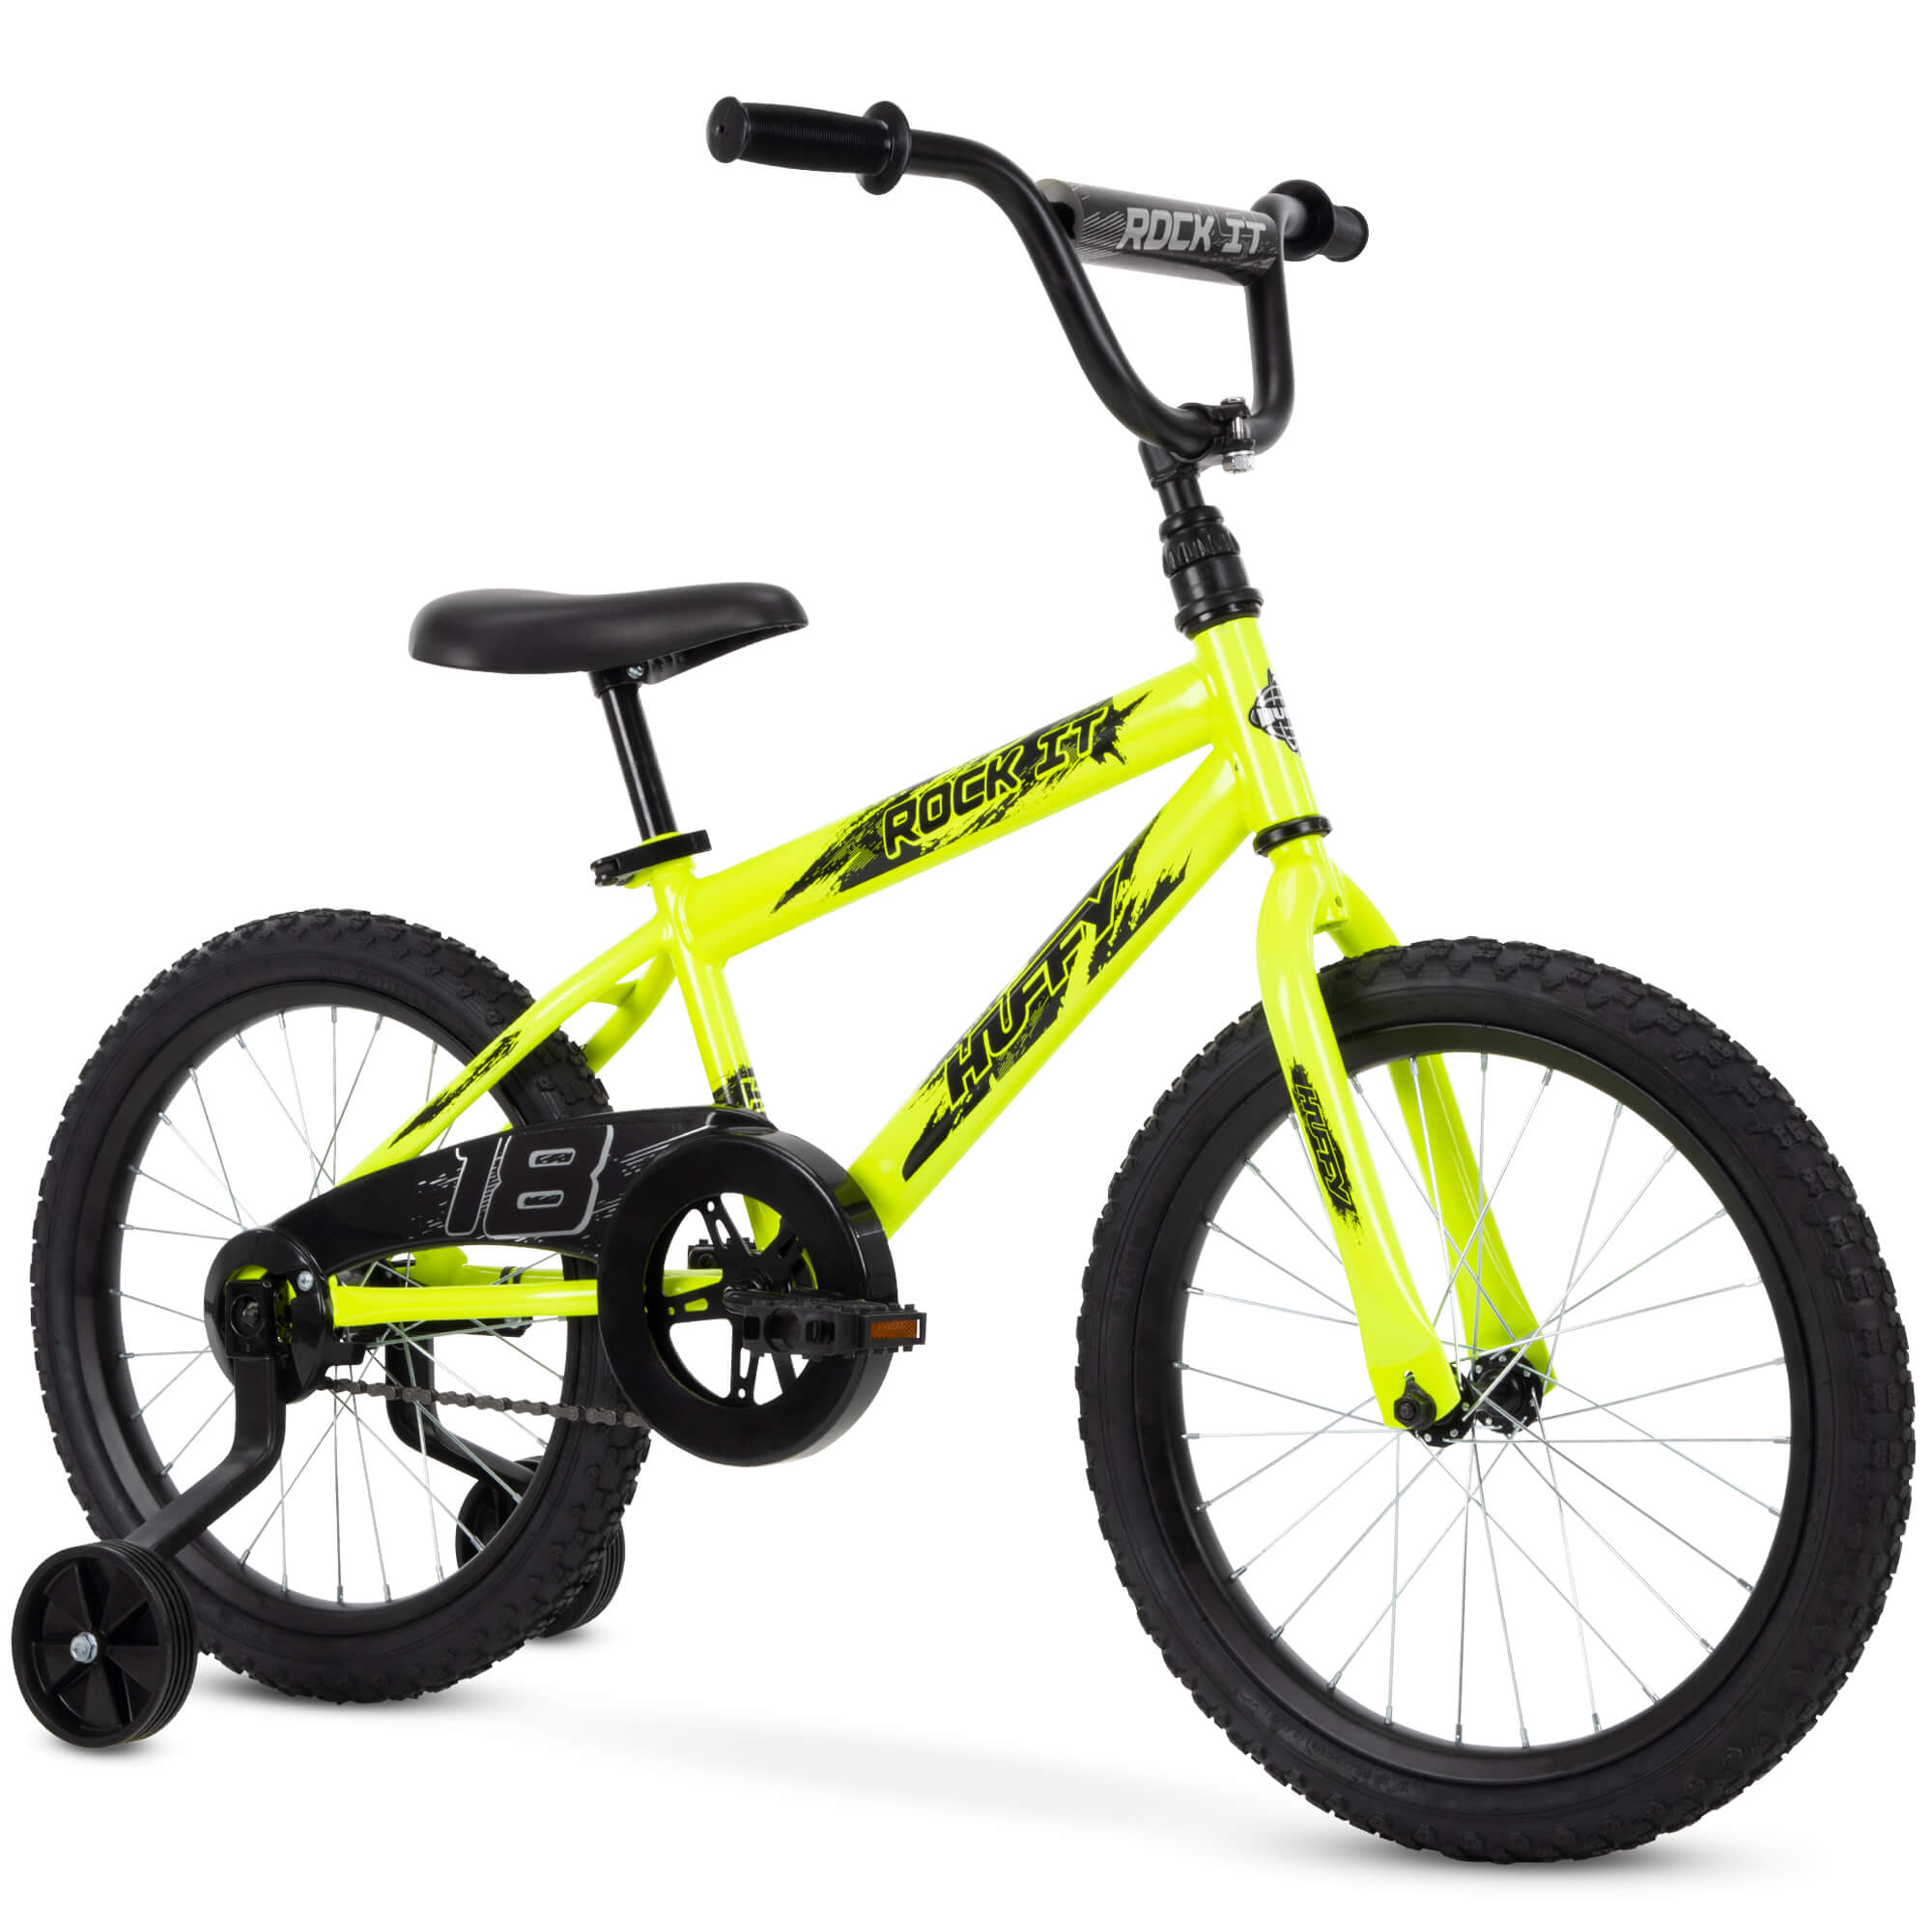 Huffy 18 in. Rock It Kids Bike for Boys Ages 4 and up, Child, Neon Powder Yellow - image 3 of 16